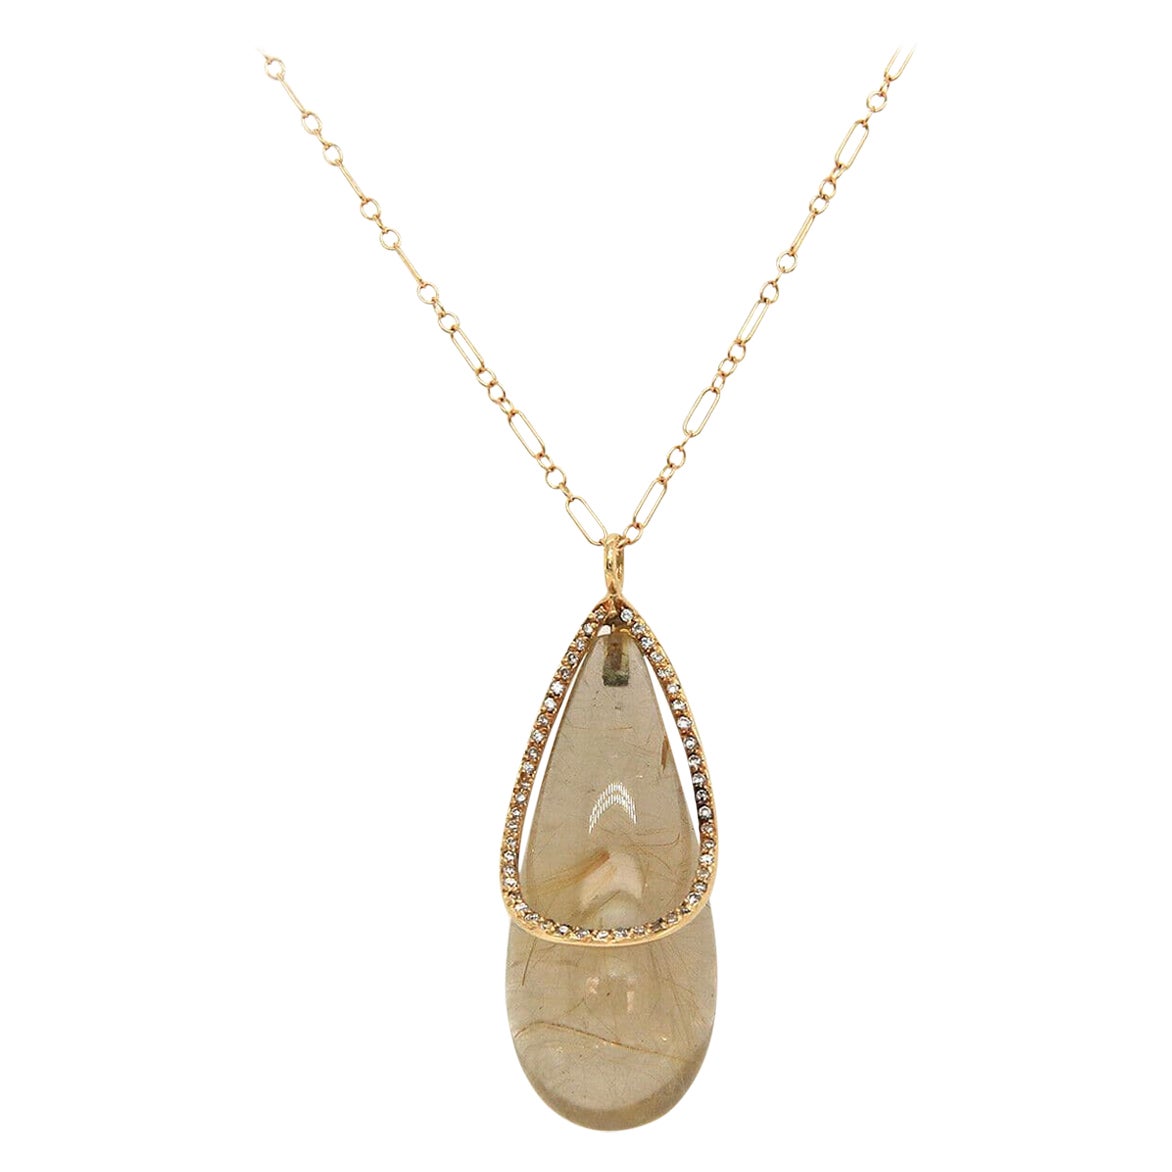 Mauri Pioppo Rutilated Quartz and Diamond Pendant Necklace in 18K Yellow Gold For Sale